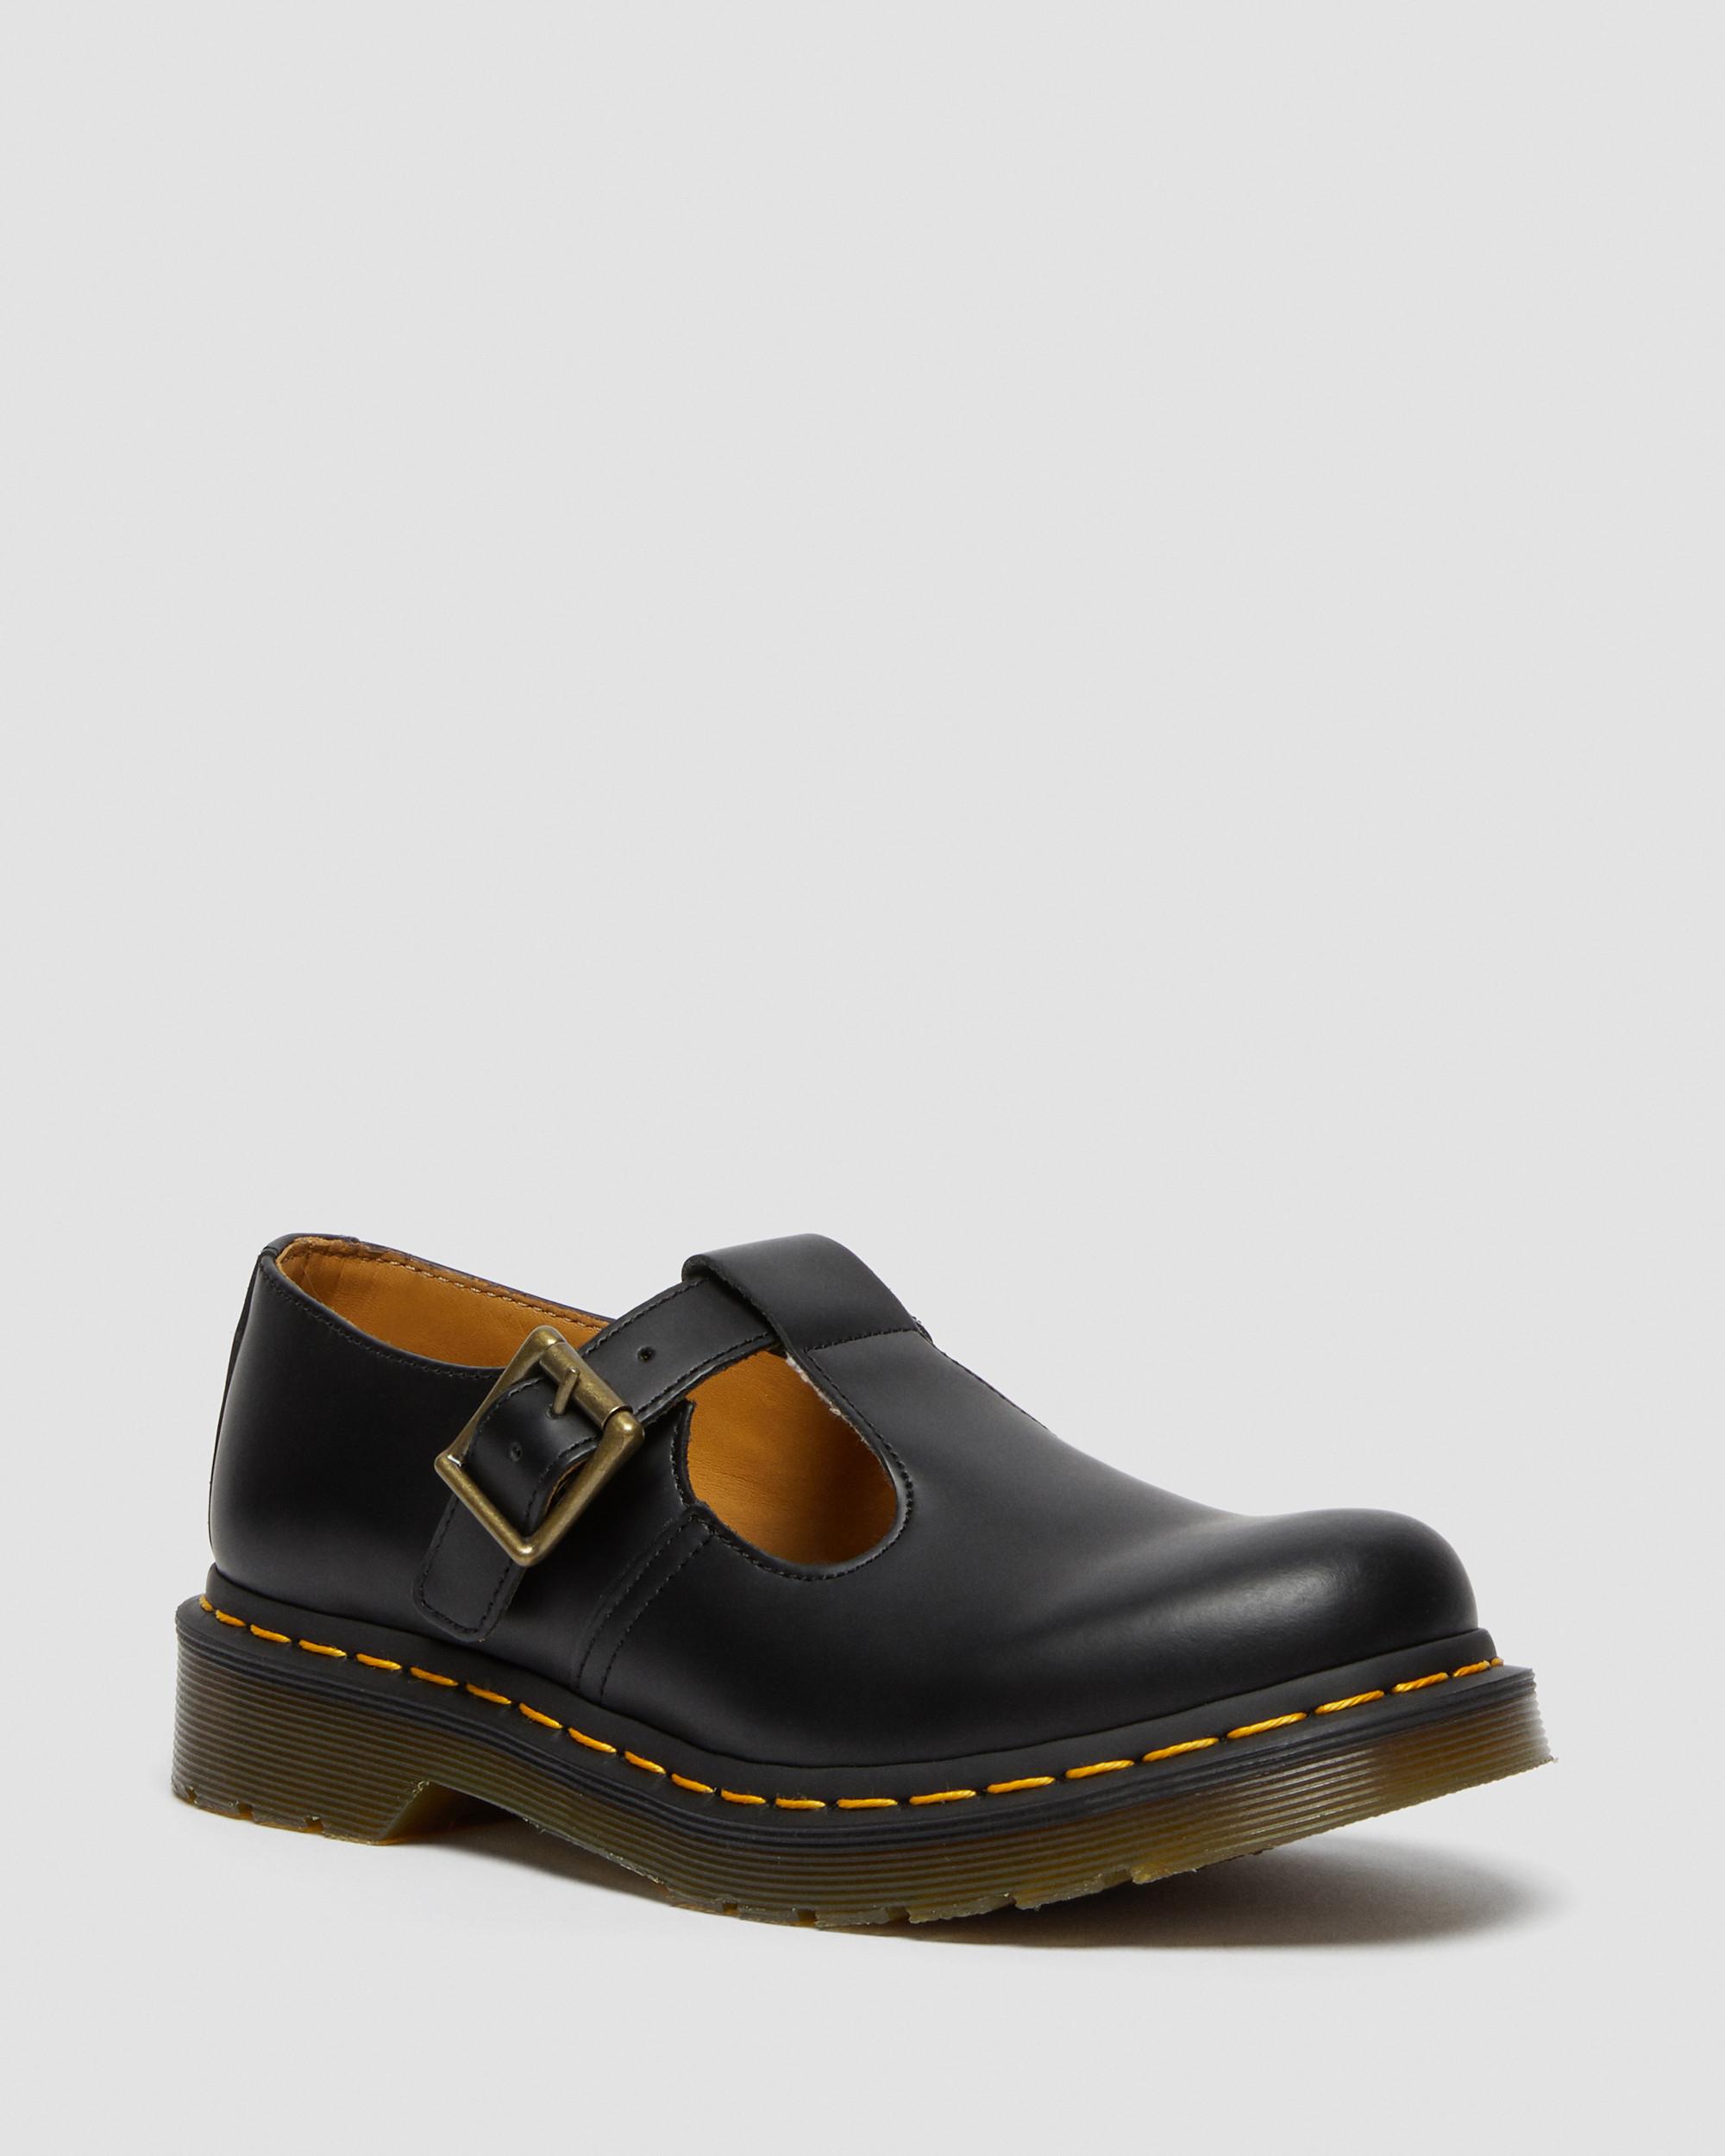 Scarpe Mary Jane Polley nere in pelle SmoothScarpe Mary Jane Polley in pelle Smooth Dr. Martens